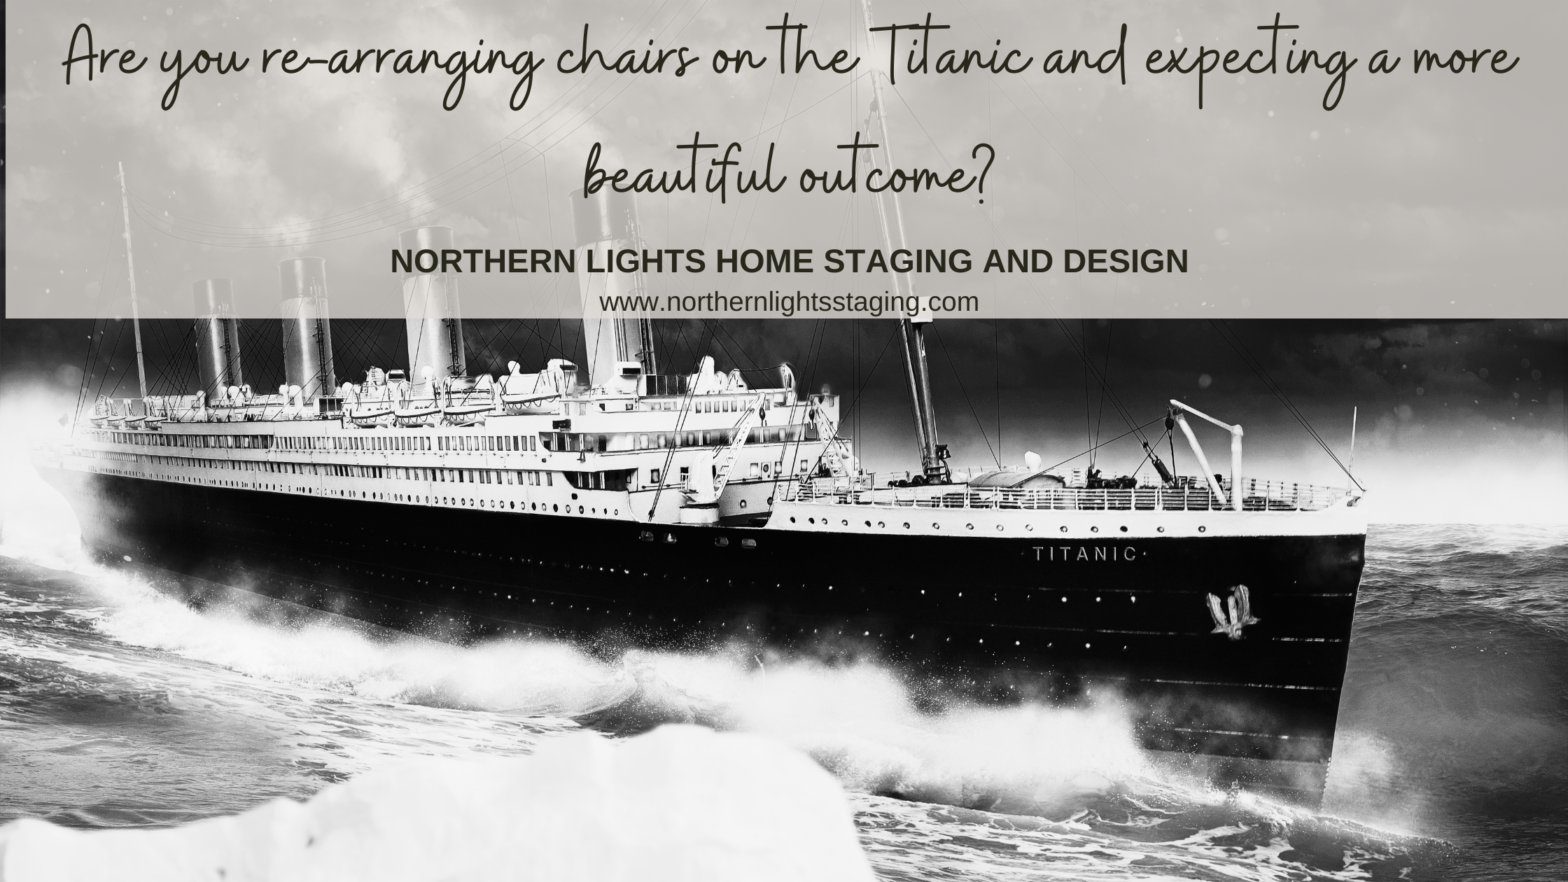 Are you re-arranging the chairs on the titanic and expecting a more beautiful outcome?